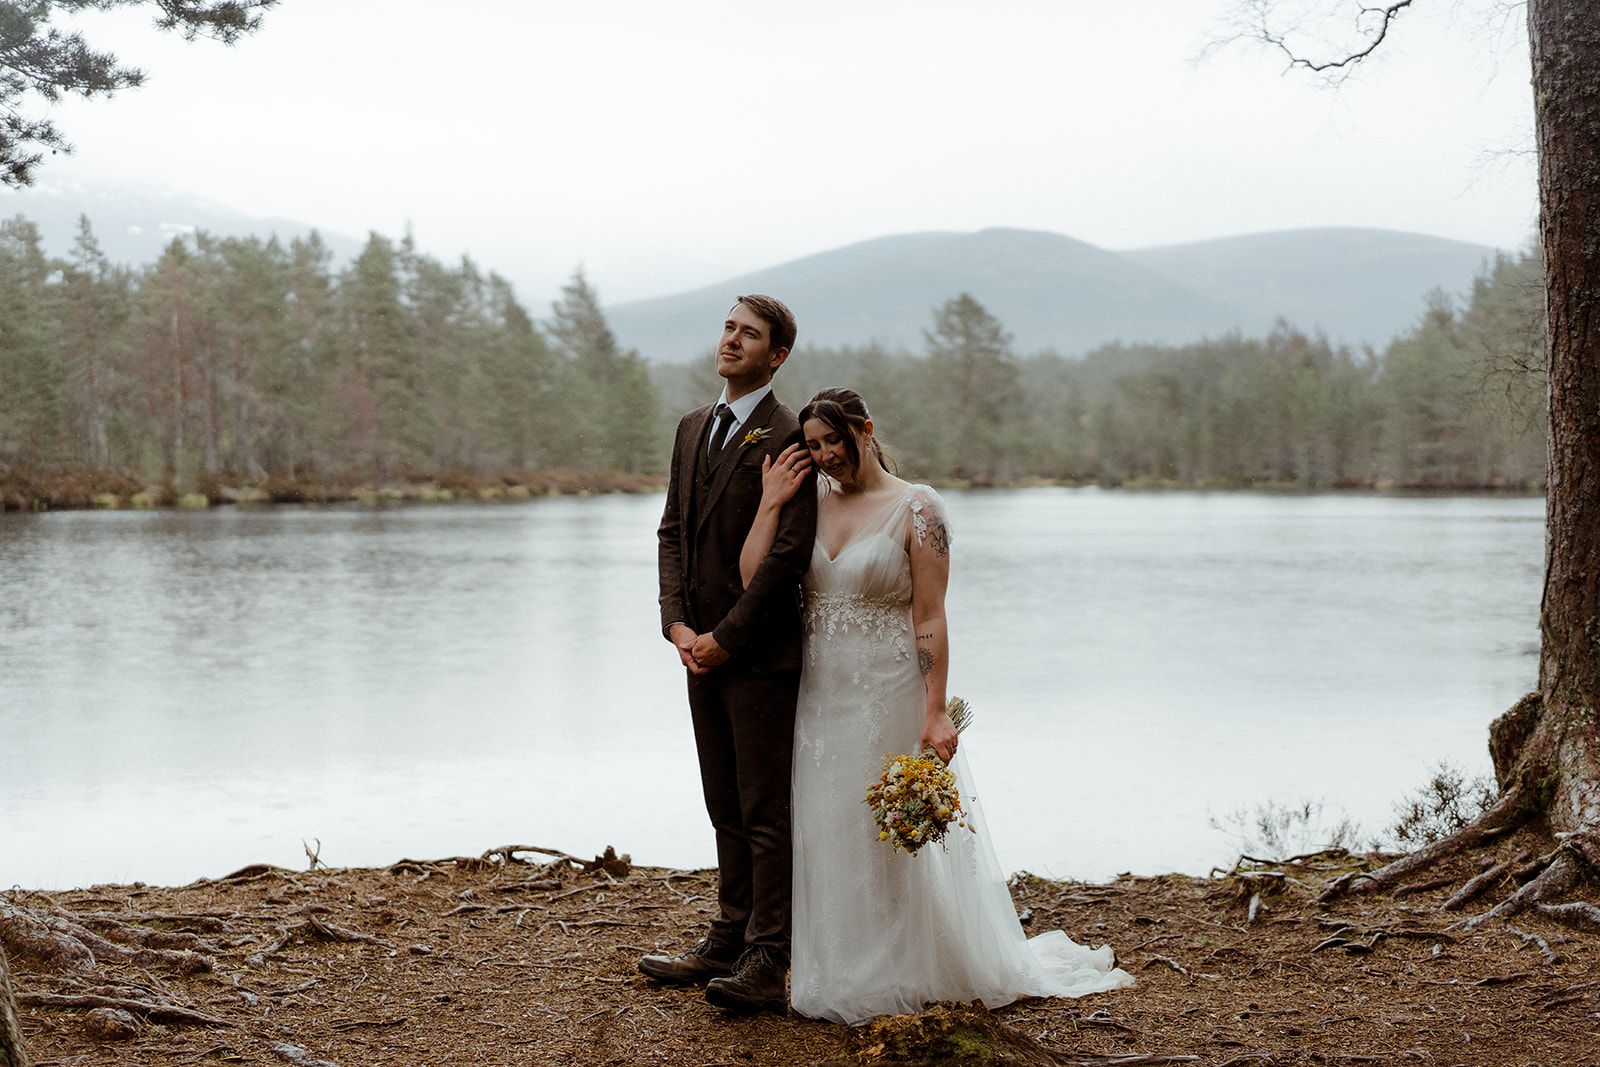 Bride and Groom embrace next to a Scottish Loch with views of the Cairngorm Mountains